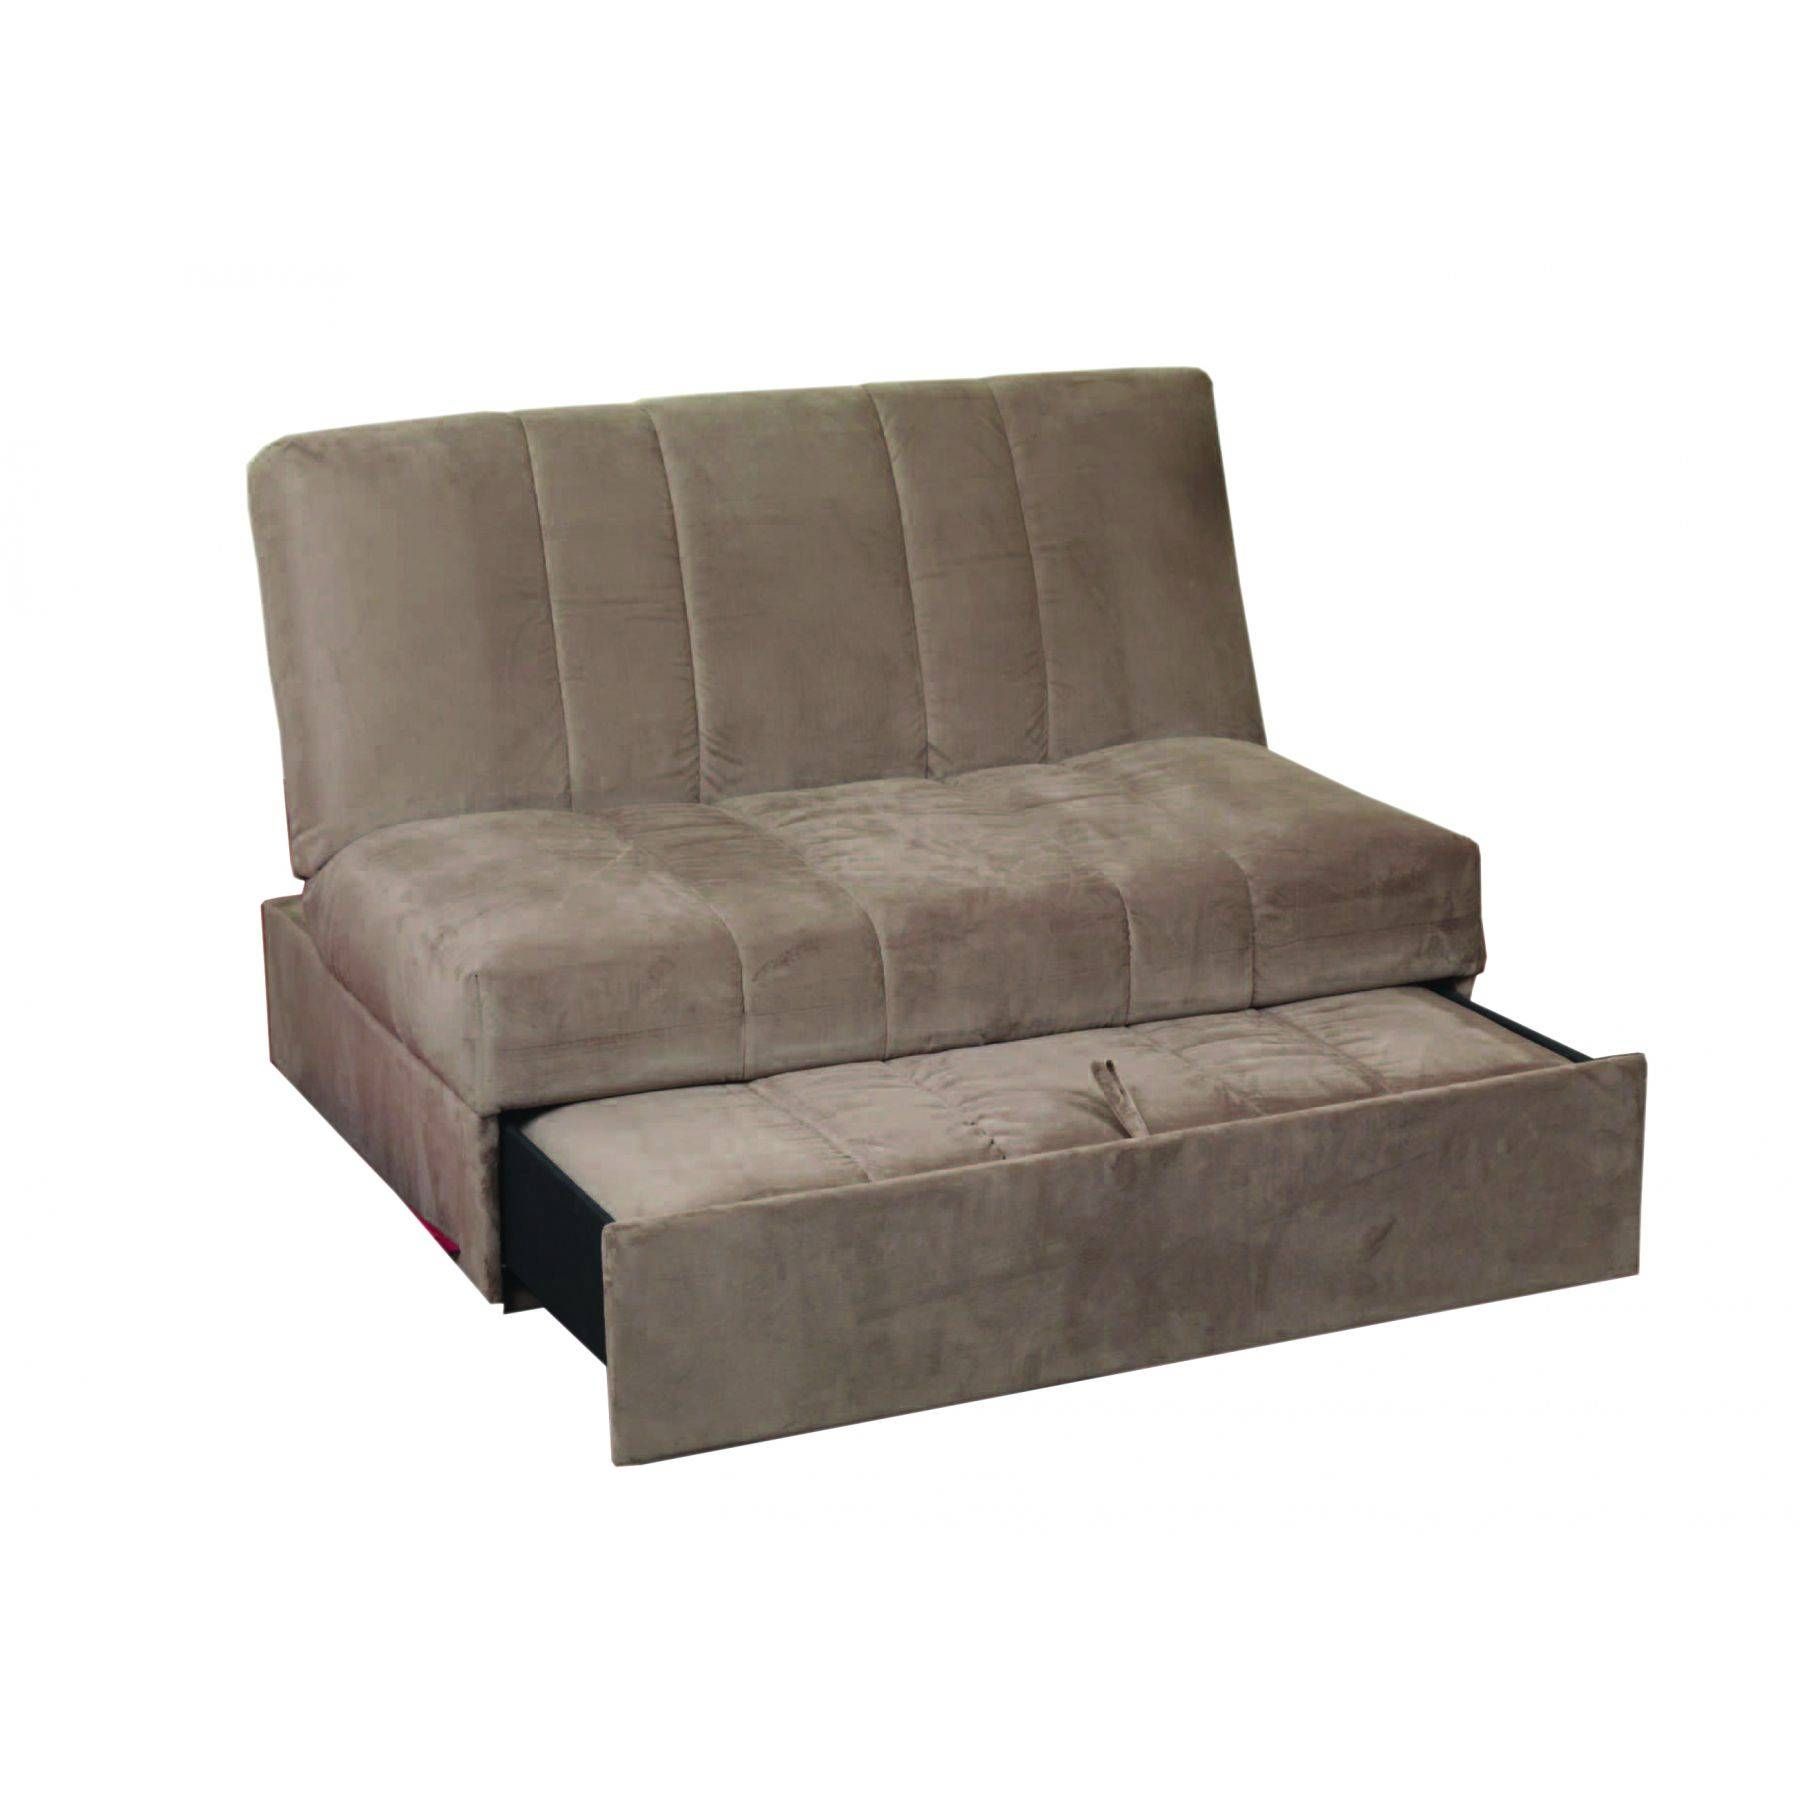 2 Seater Sofa Bed | Teabiz Within Small 2 Seater Sofas (View 23 of 30)